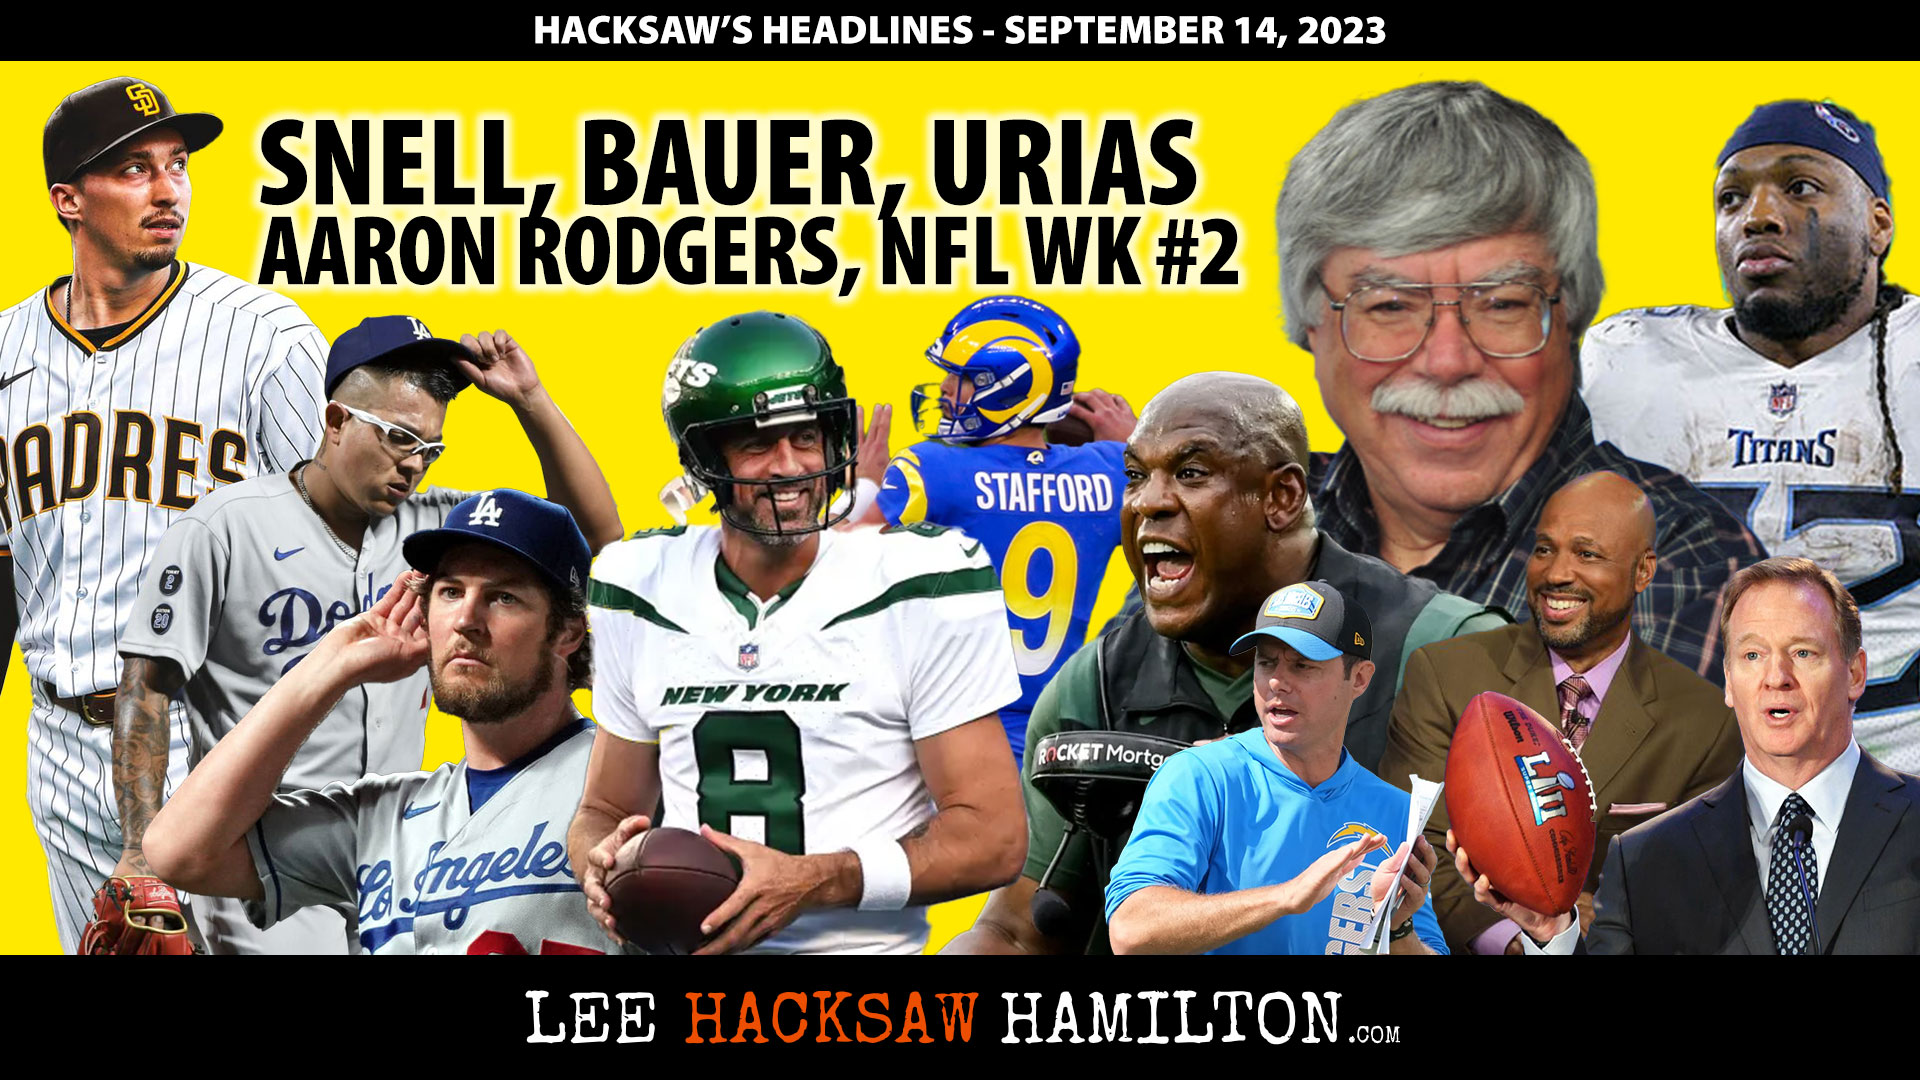 Lee Hacksaw Hamilton discusses Blake Snell, Trevor Bauer, Julio Urias, Red Sox, Mets, Aaron Rodgers, NFL, Michigan State, Team USA